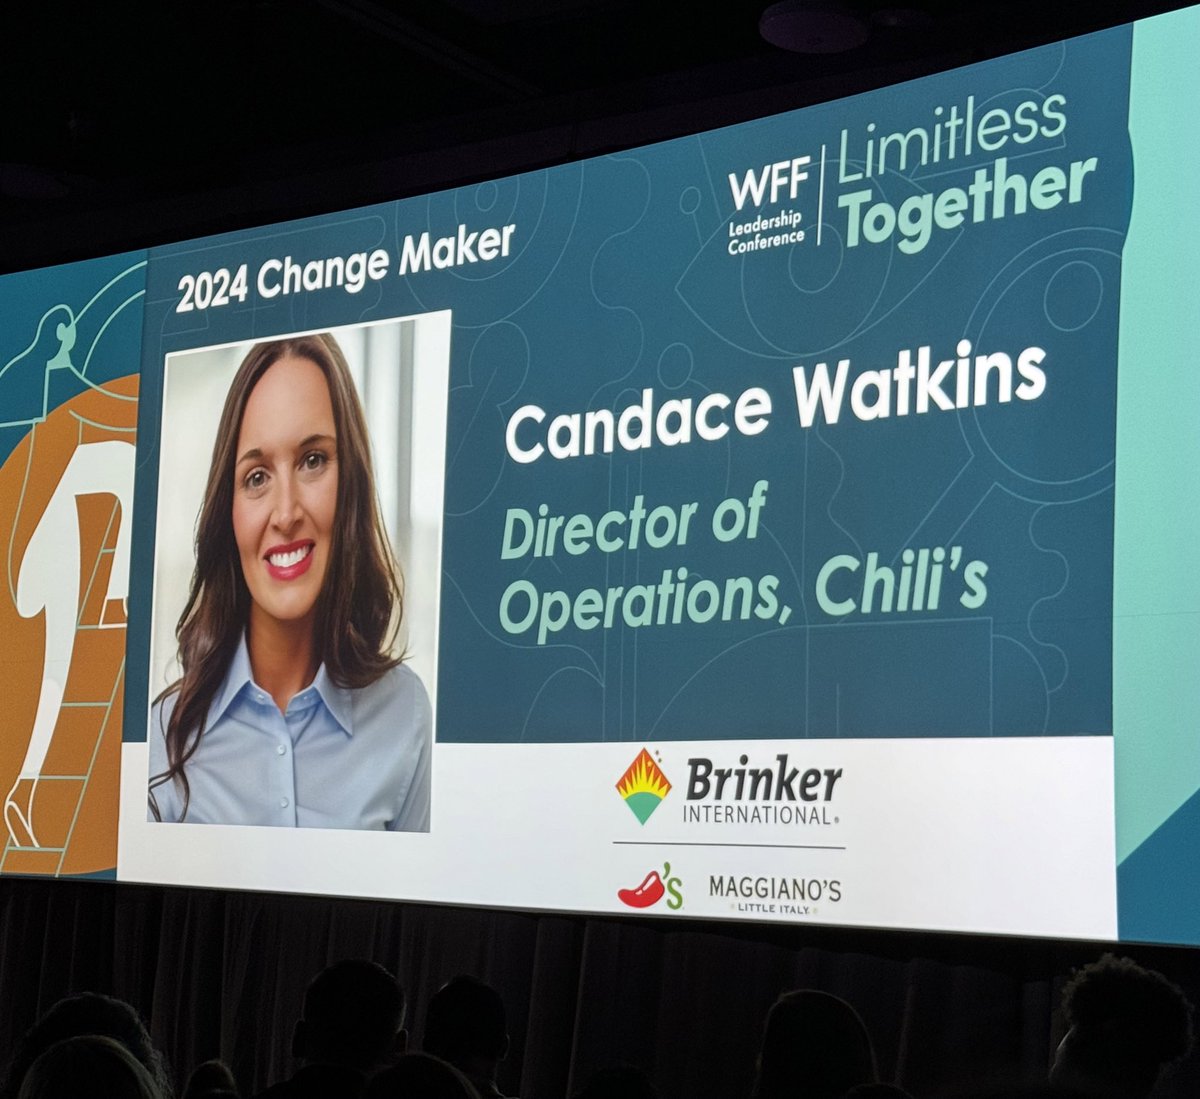 I know her🥰🌶❤️🏅Congratulations @CandaceWatkins9 on being a phenomenal ChangeMaker! We #Chilislove you! #WFFlimitless